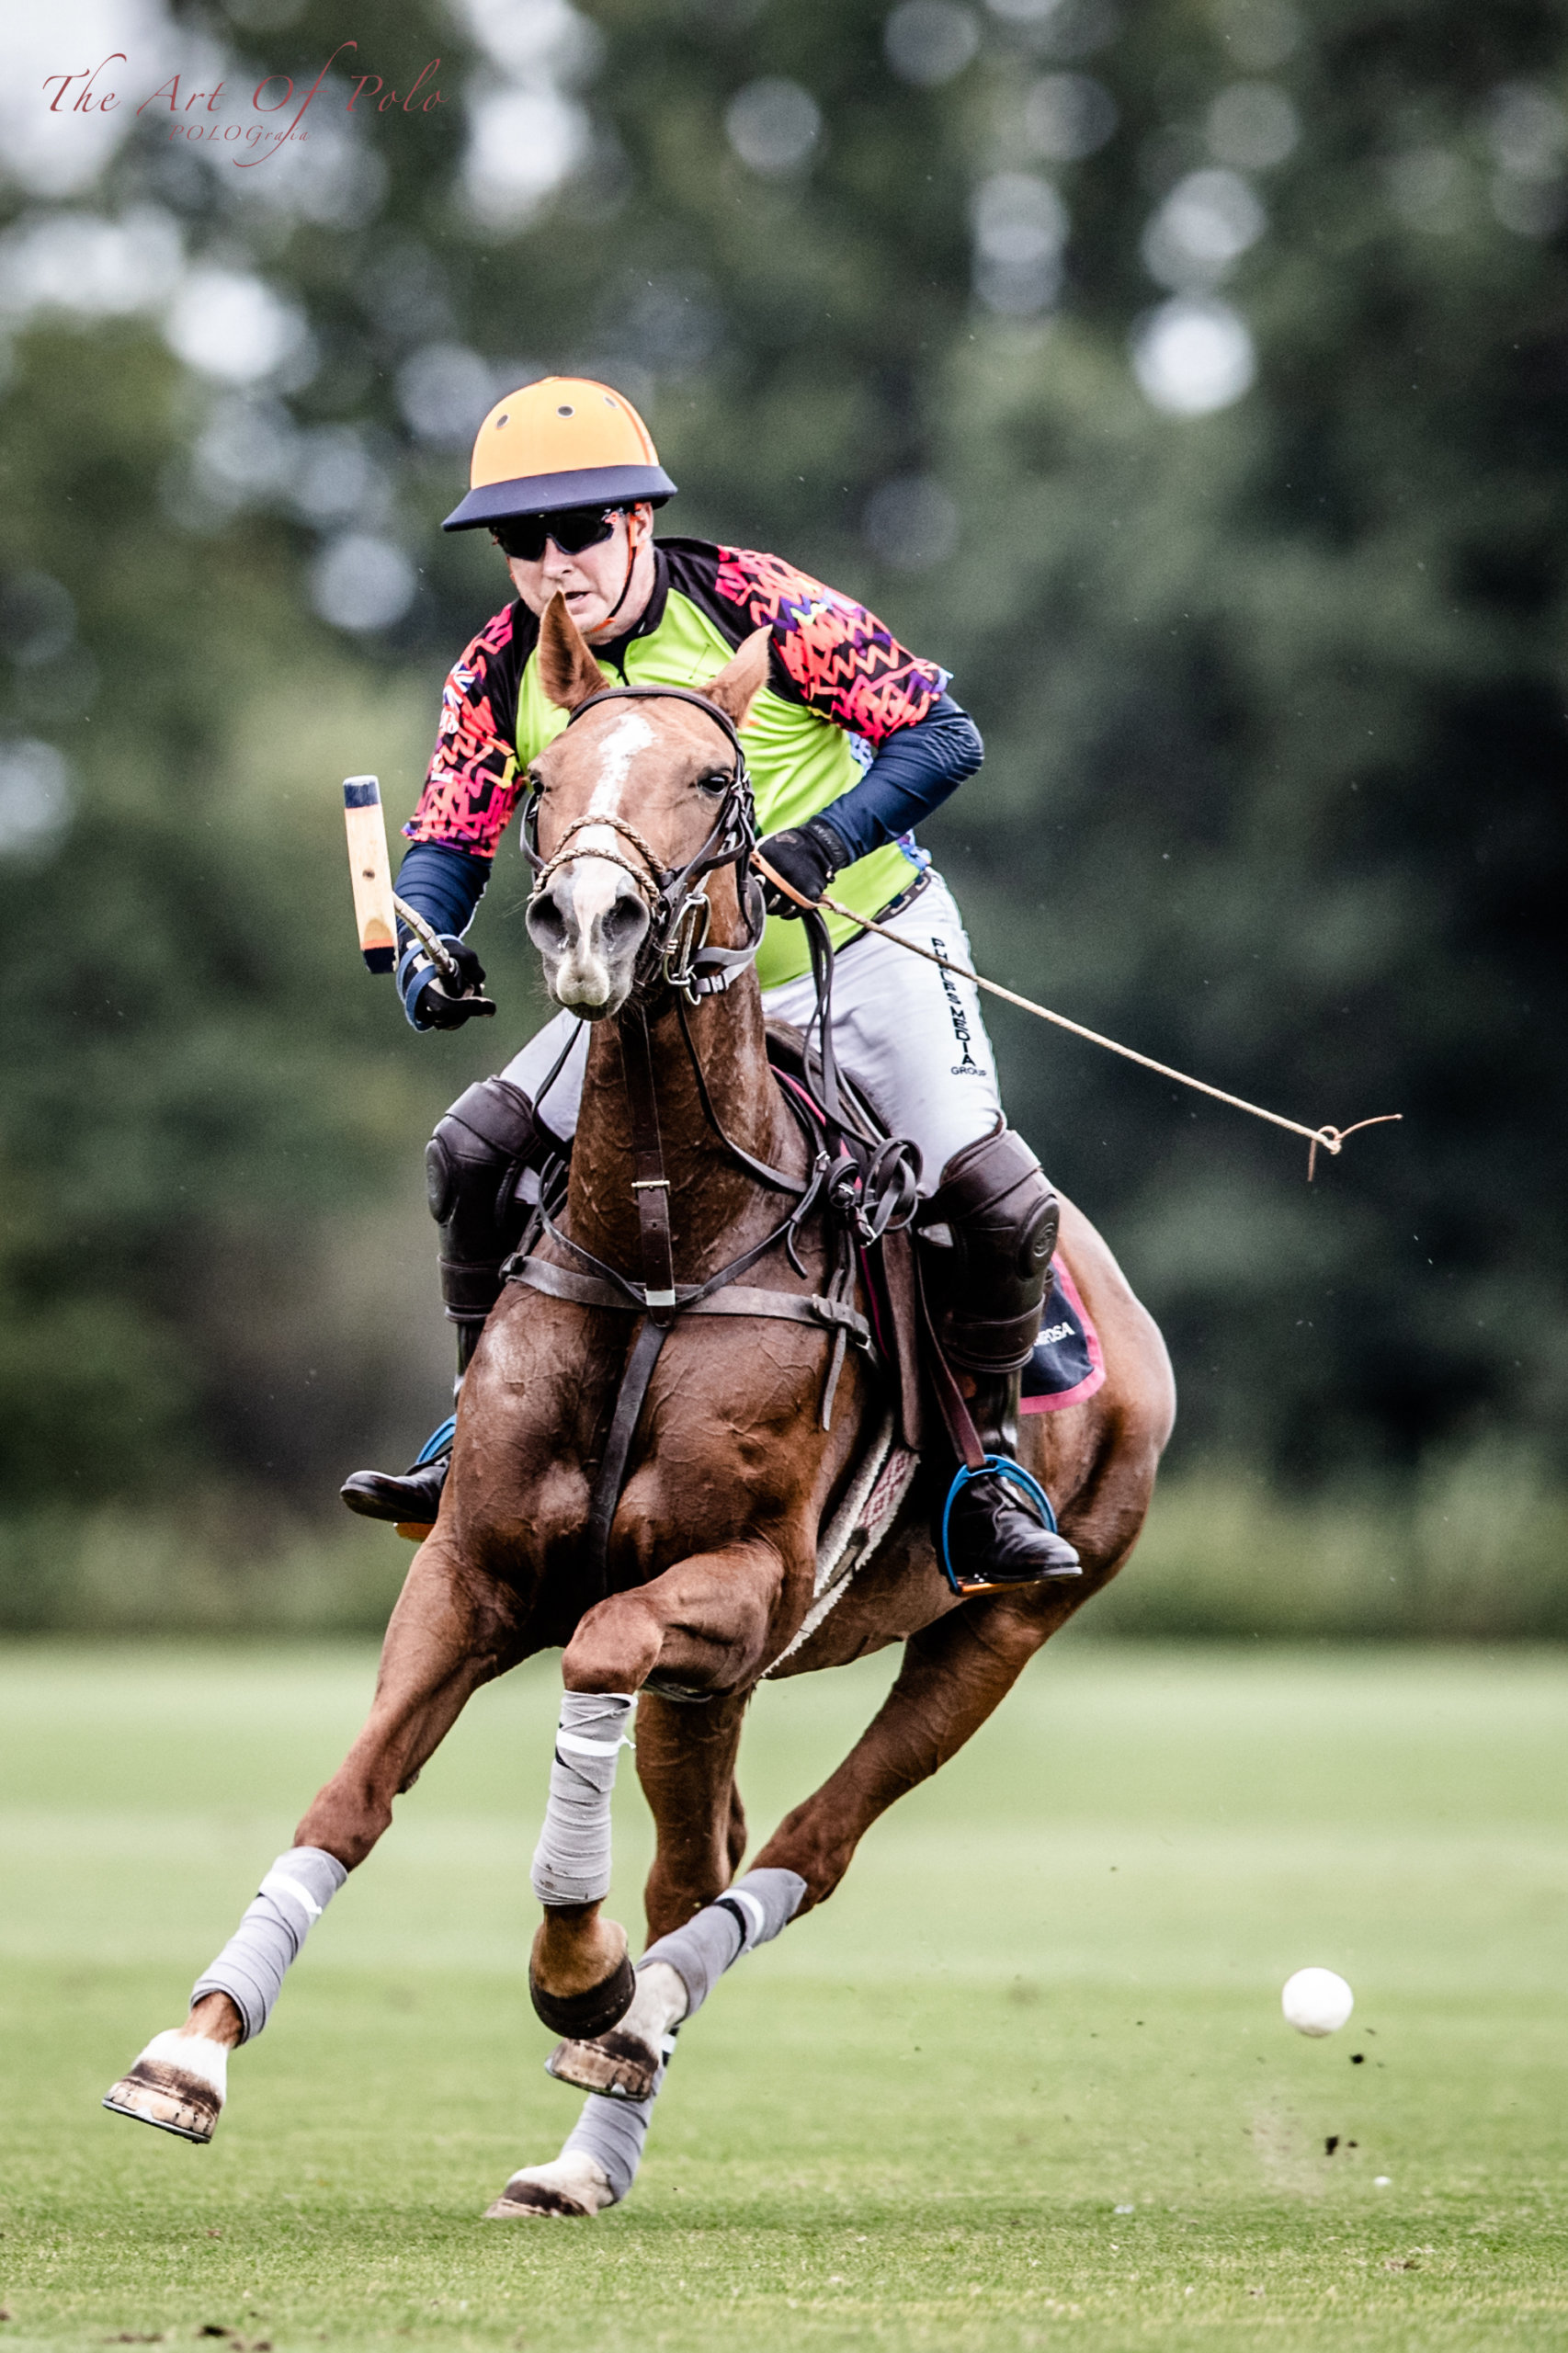 Gay Polo League founder Chip McKenney on his horse